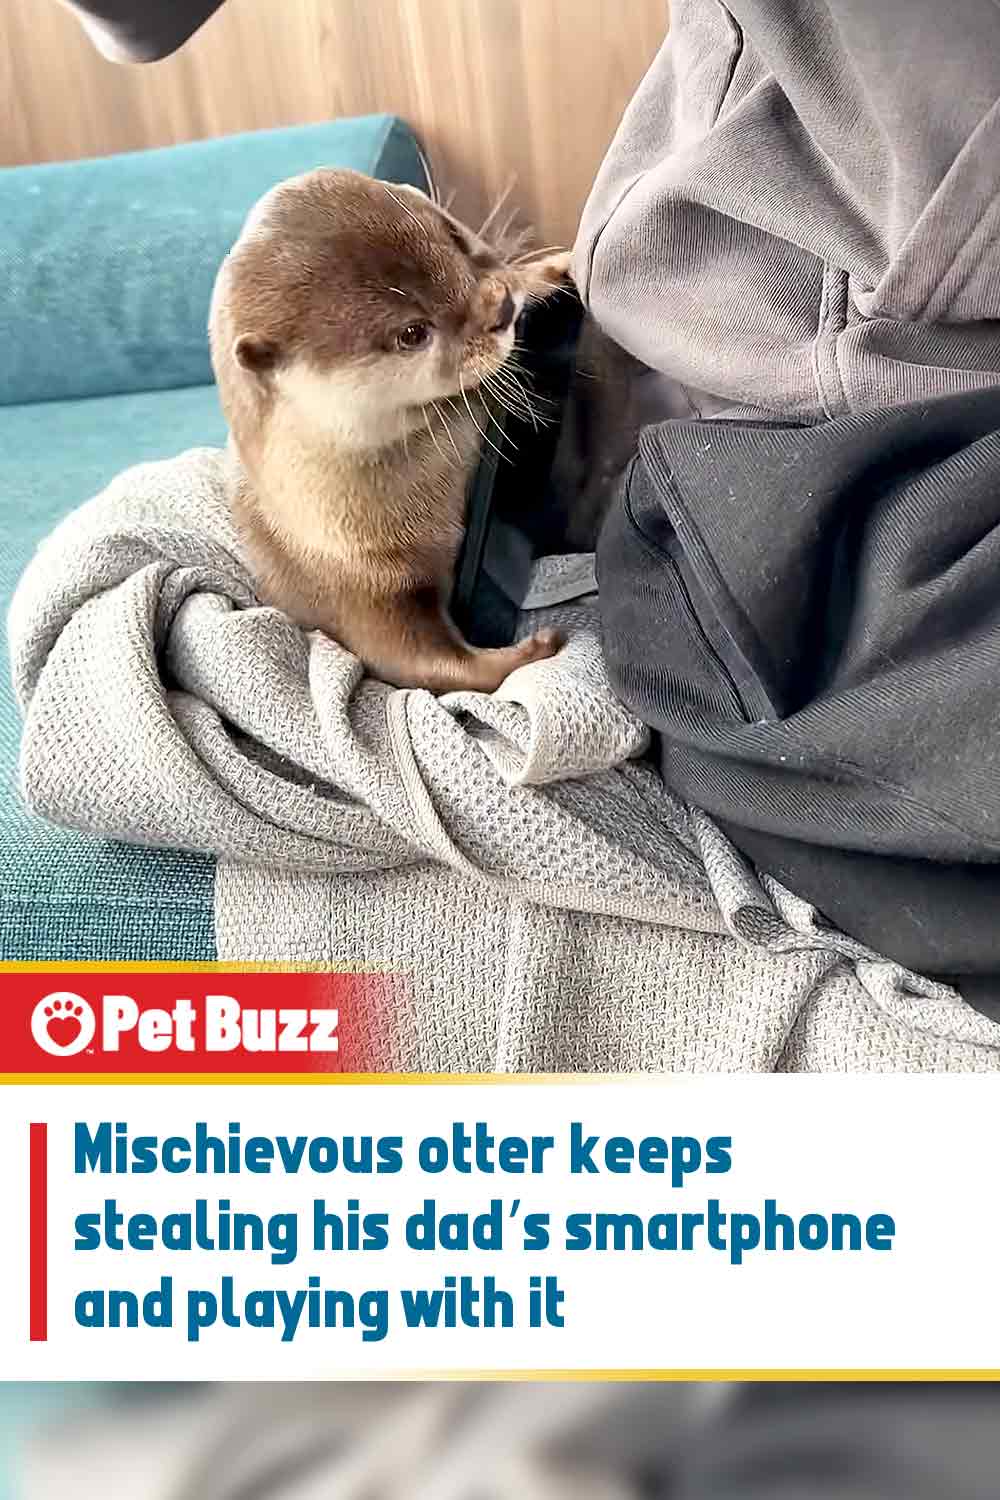 Mischievous otter keeps stealing his dad’s smartphone and playing with it